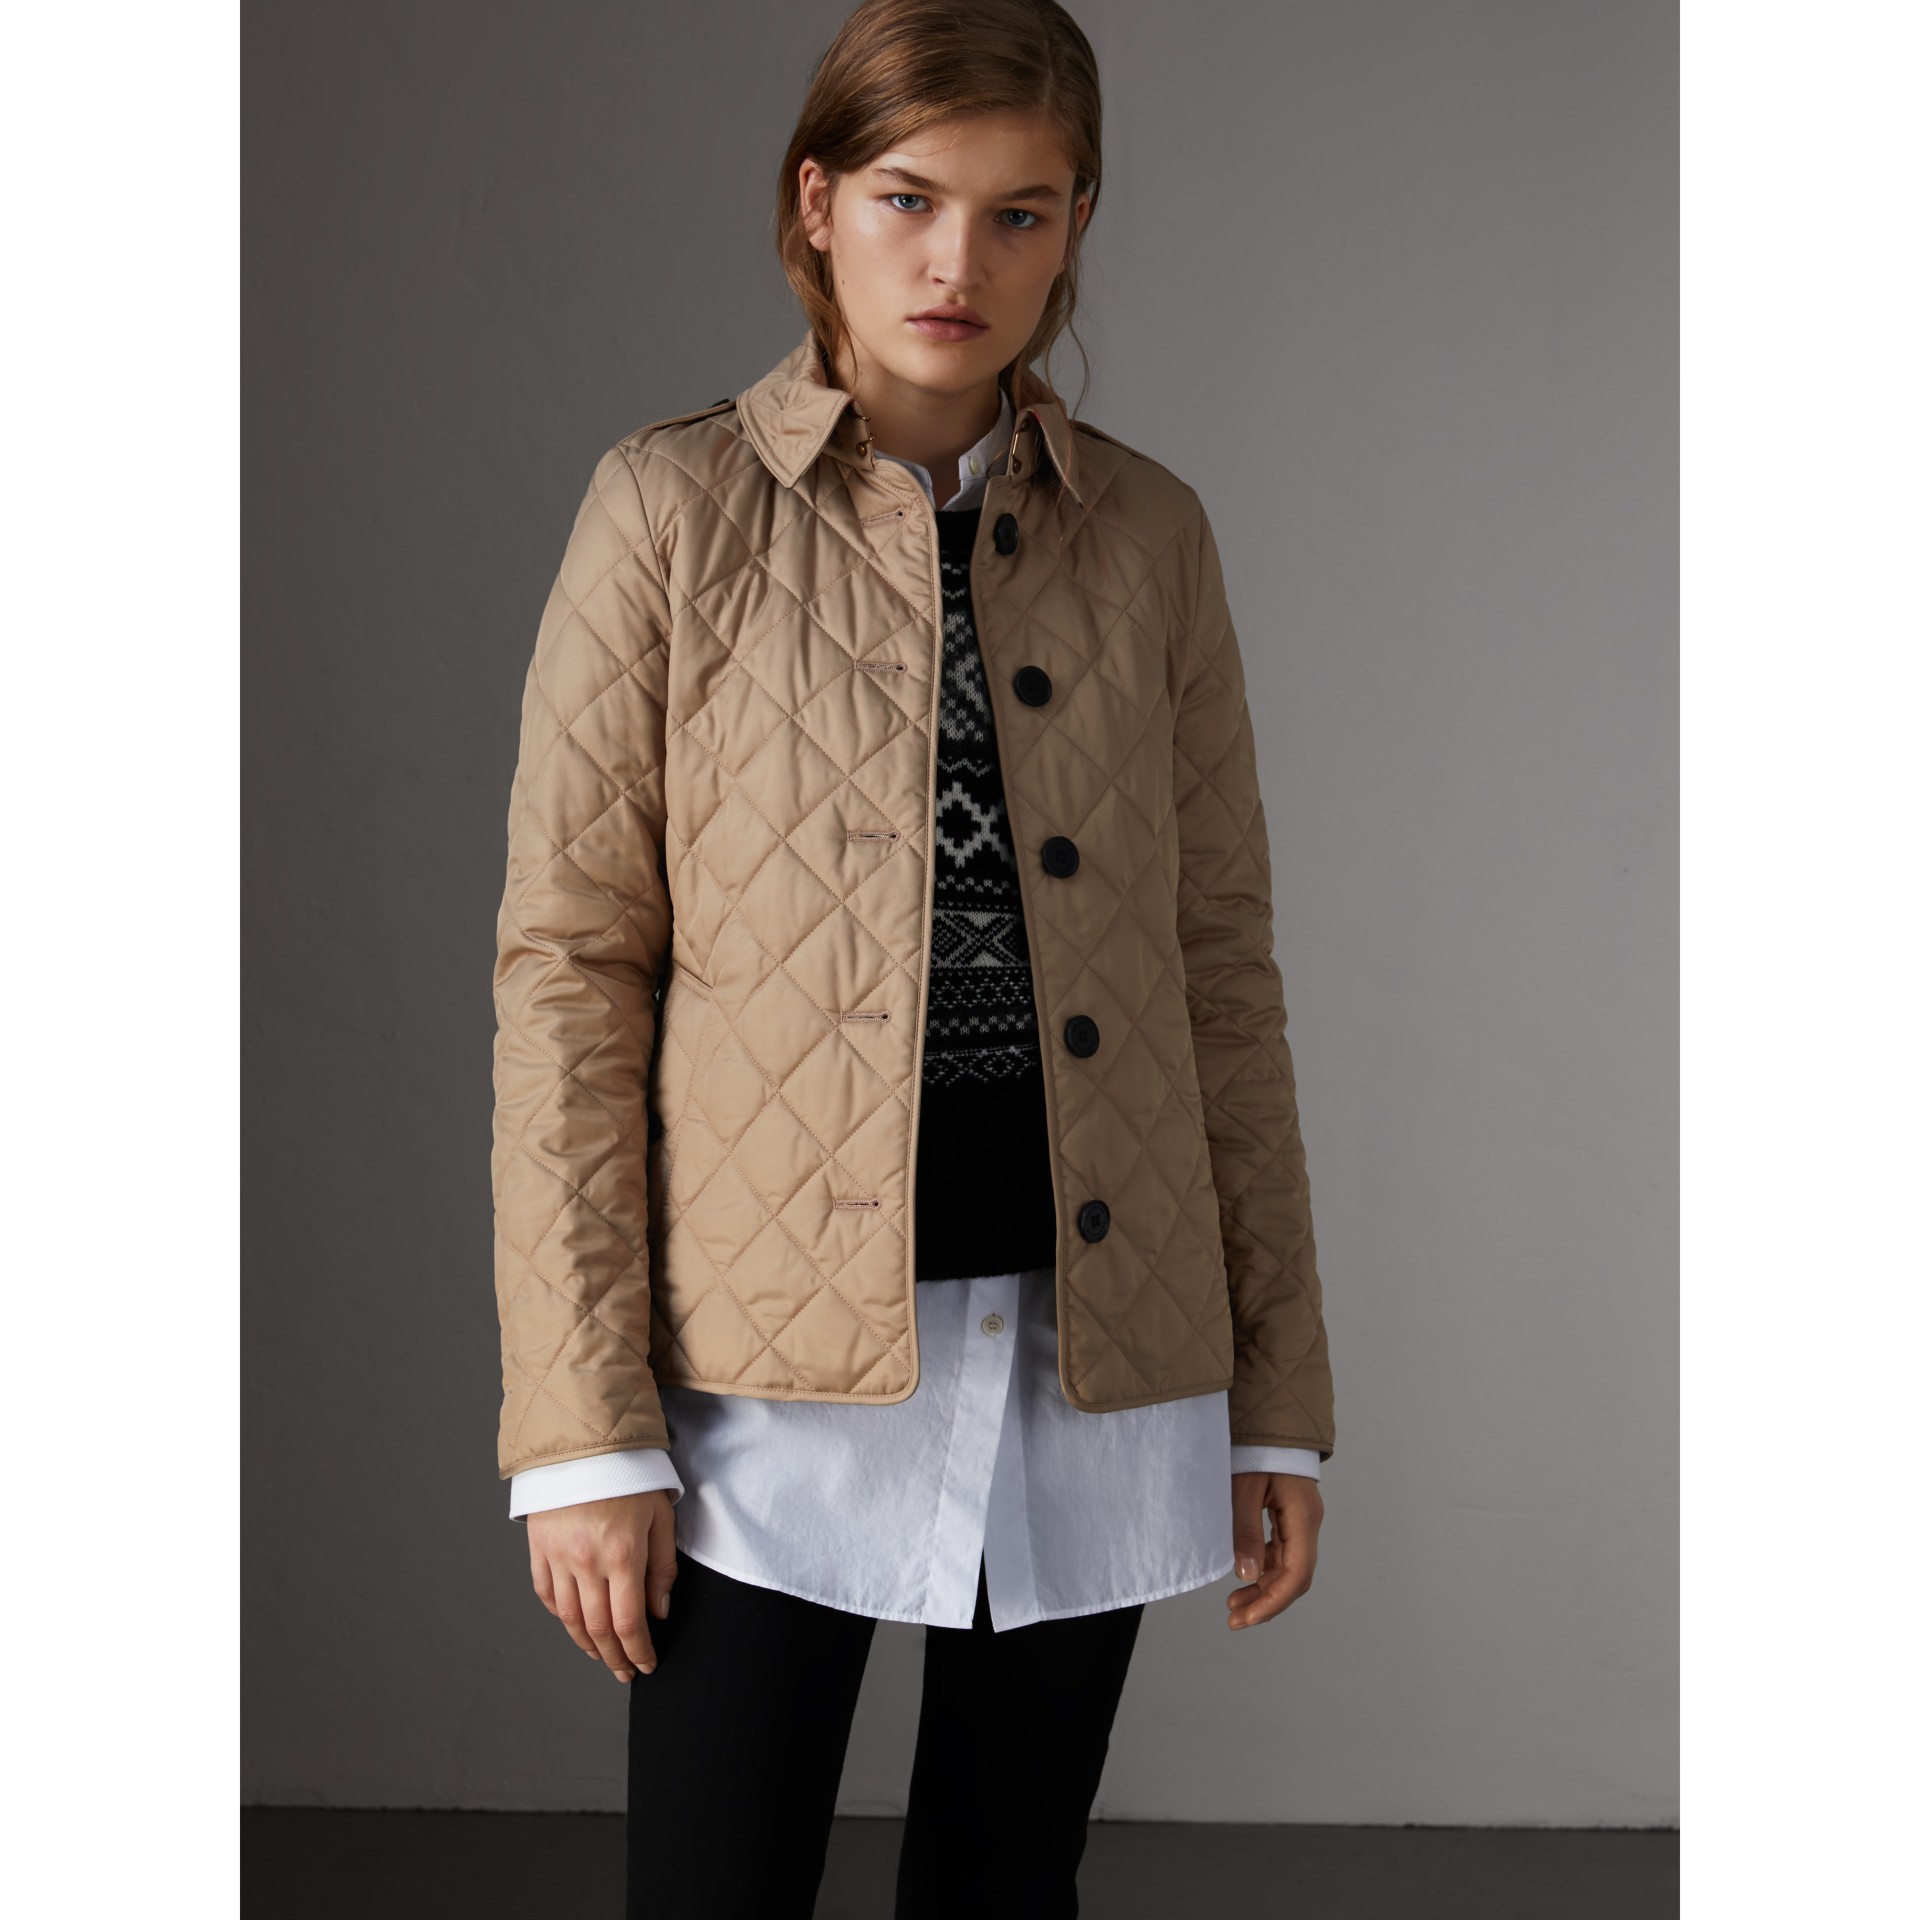 Diamond Quilted Jacket in Canvas - Women | Burberry United States